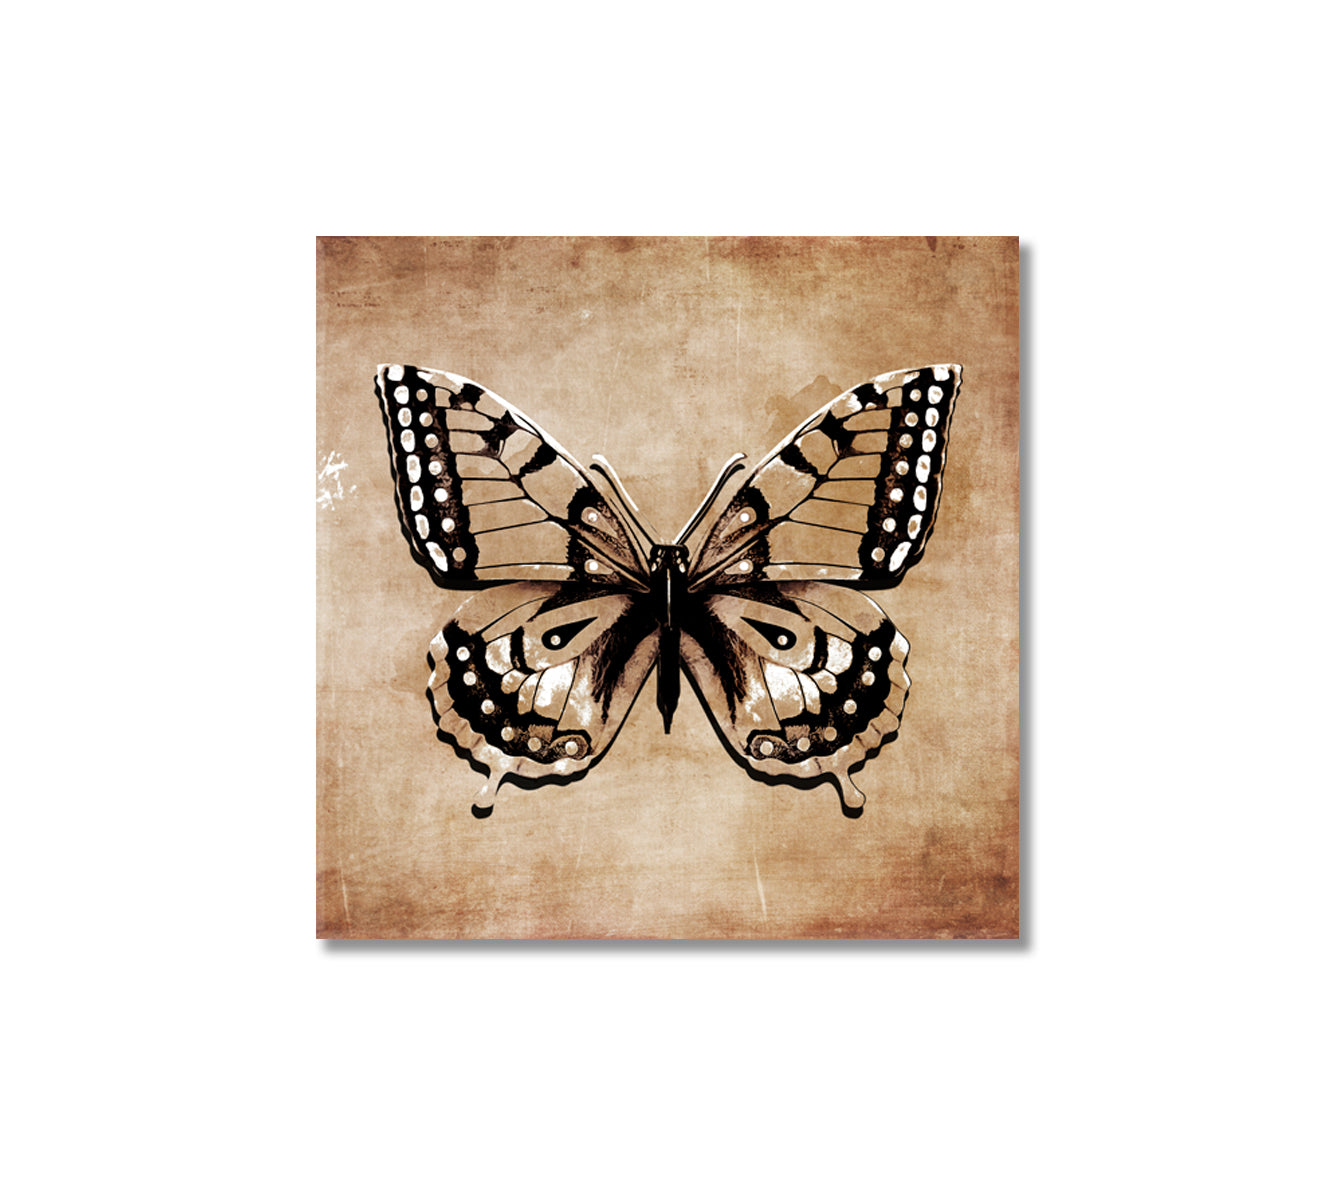 Vintage Abstract Butterfly Wall Art Canvas-Canvas Print-CetArt-1 panel-12x12 inches-CetArt